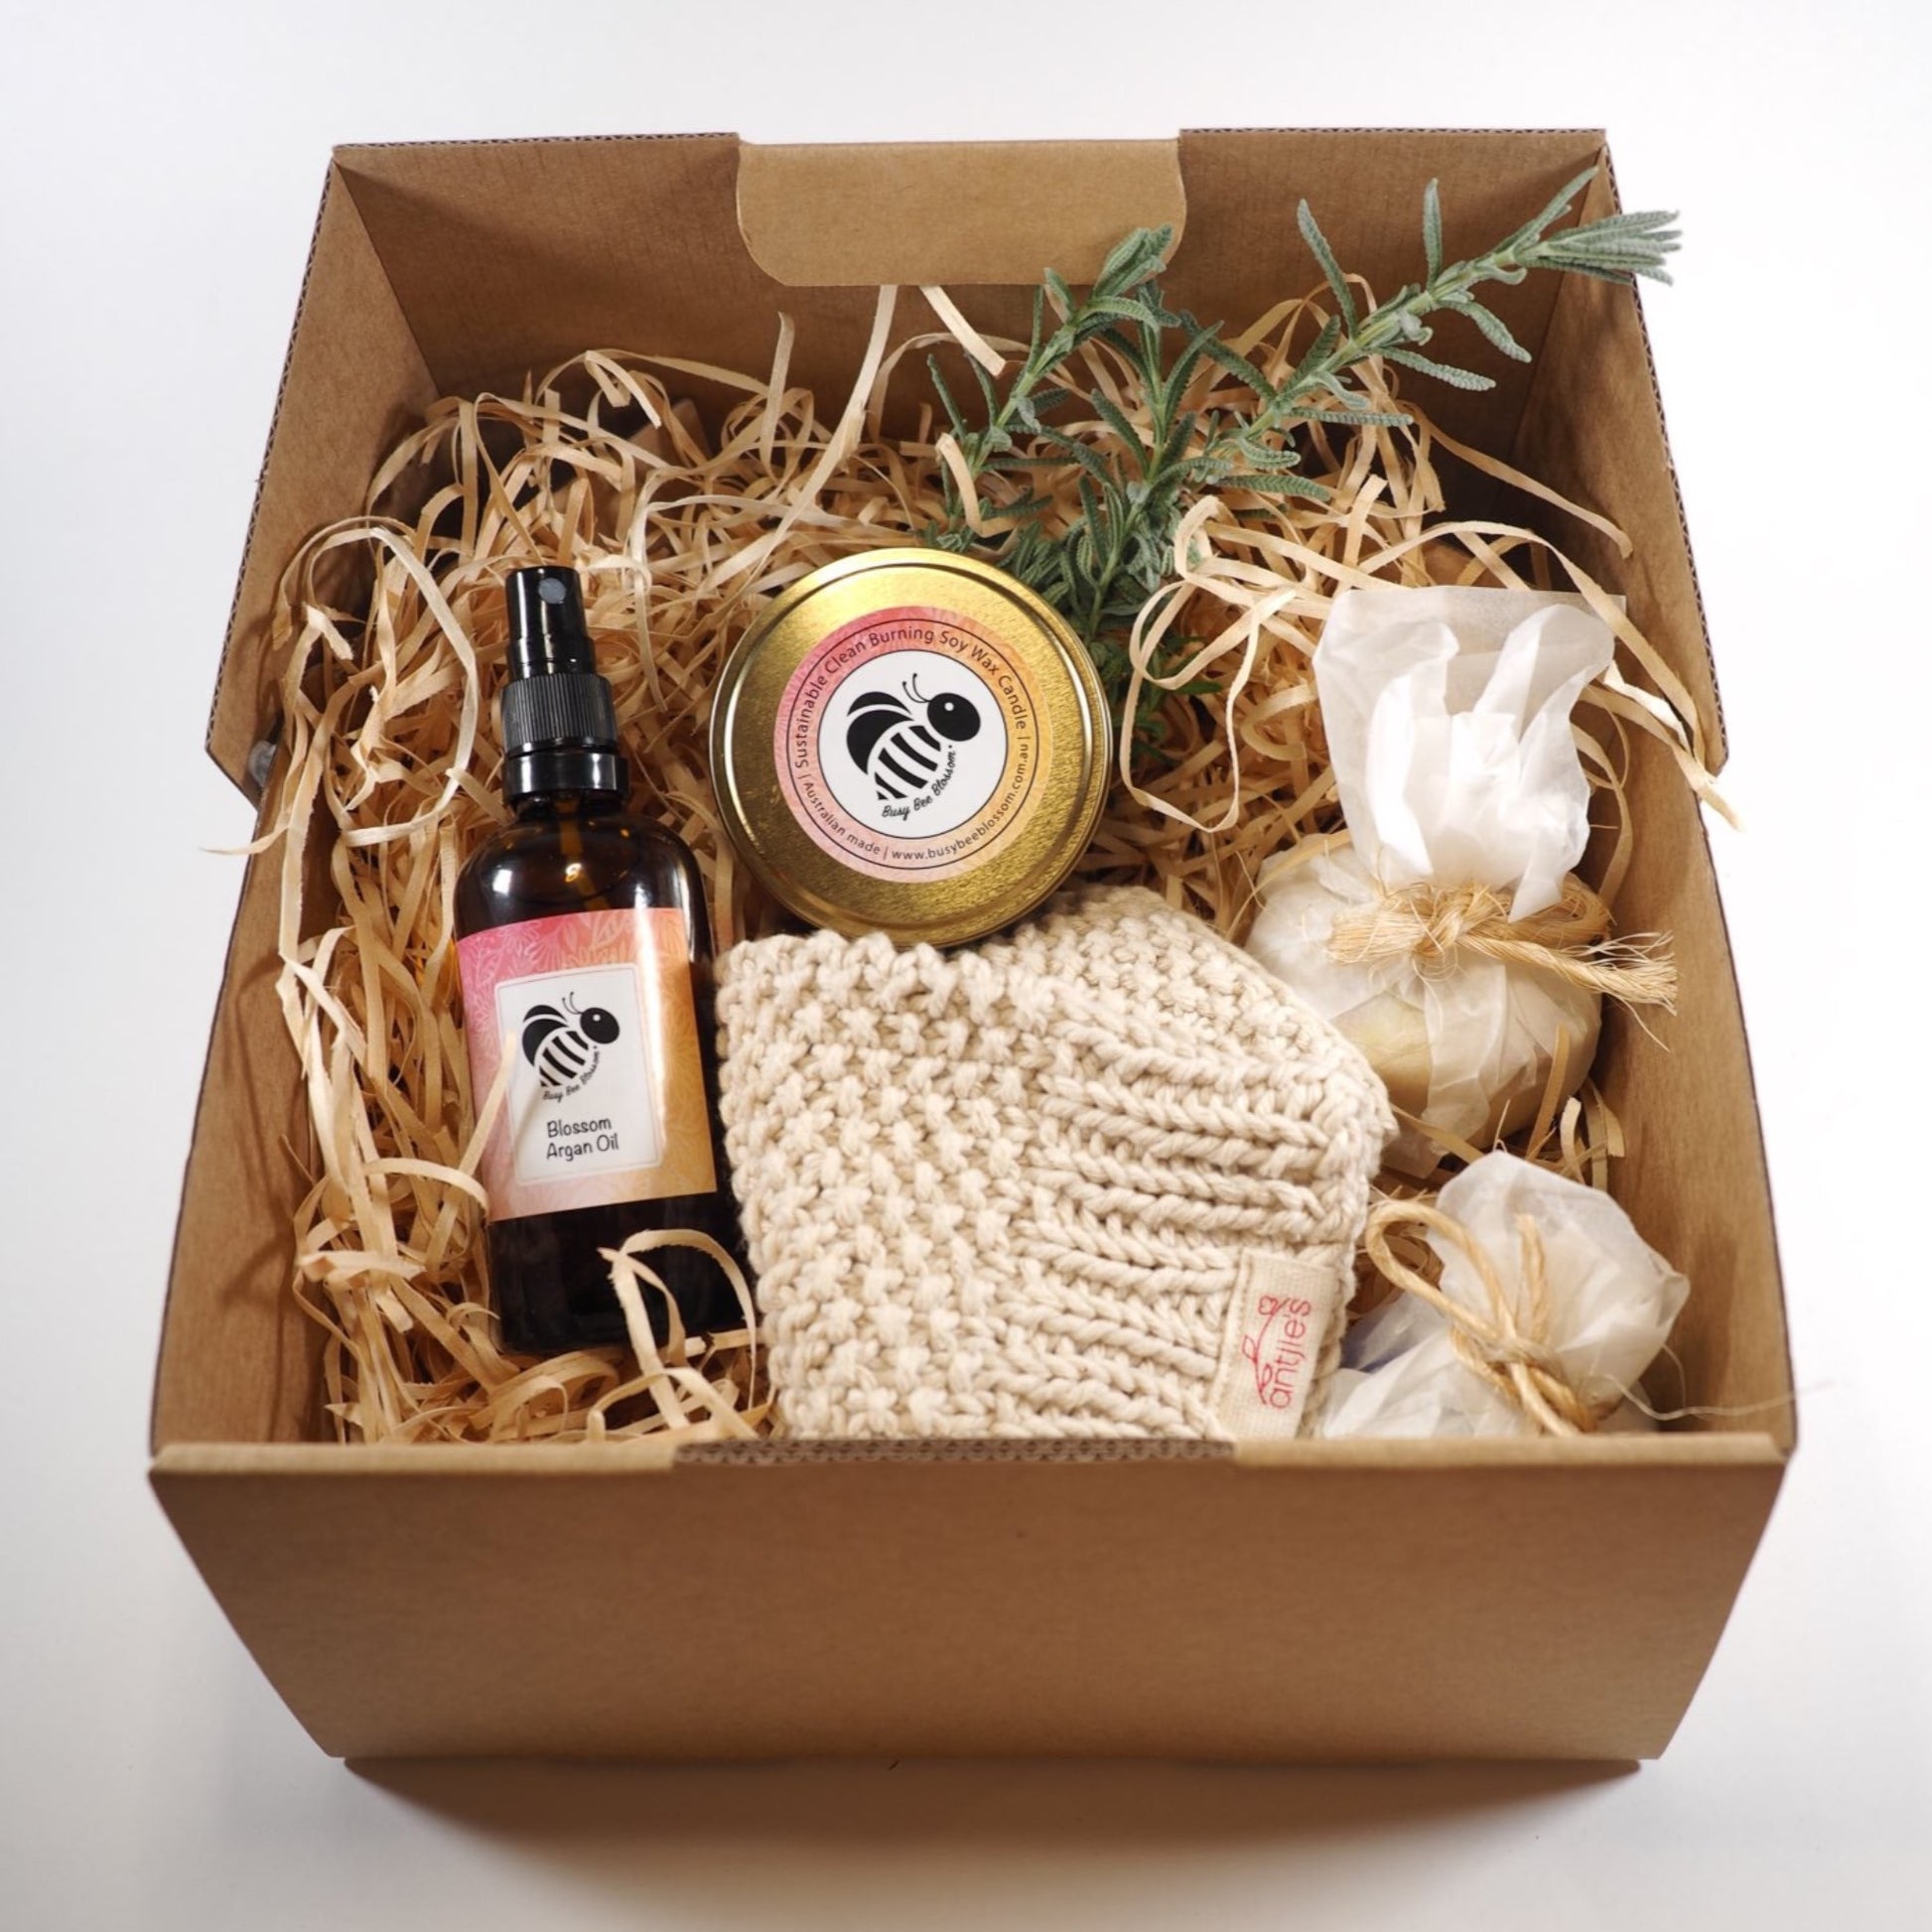 Exfoliation Superhero gift set contains Argan Oil, shower mitt, cleansing bars and coconut soy candle